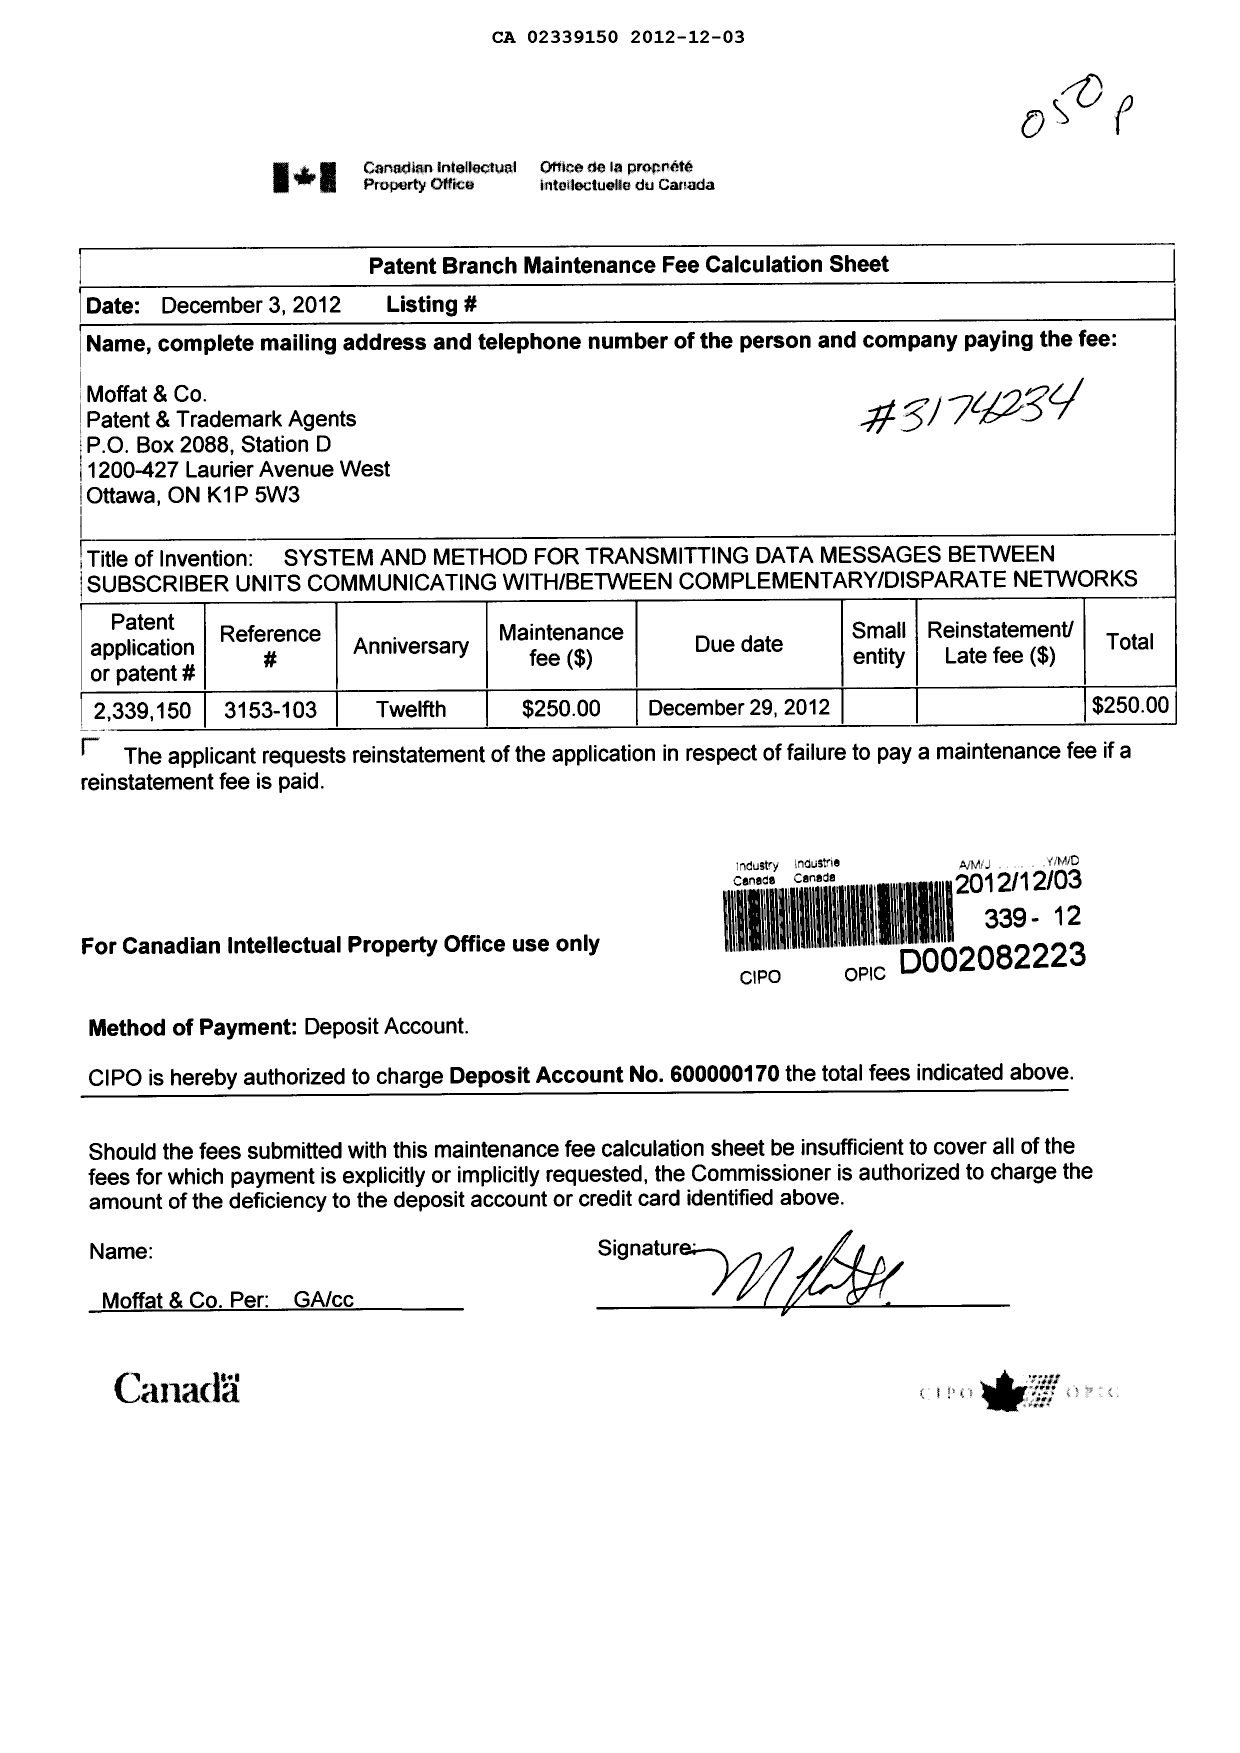 Canadian Patent Document 2339150. Fees 20121203. Image 1 of 1